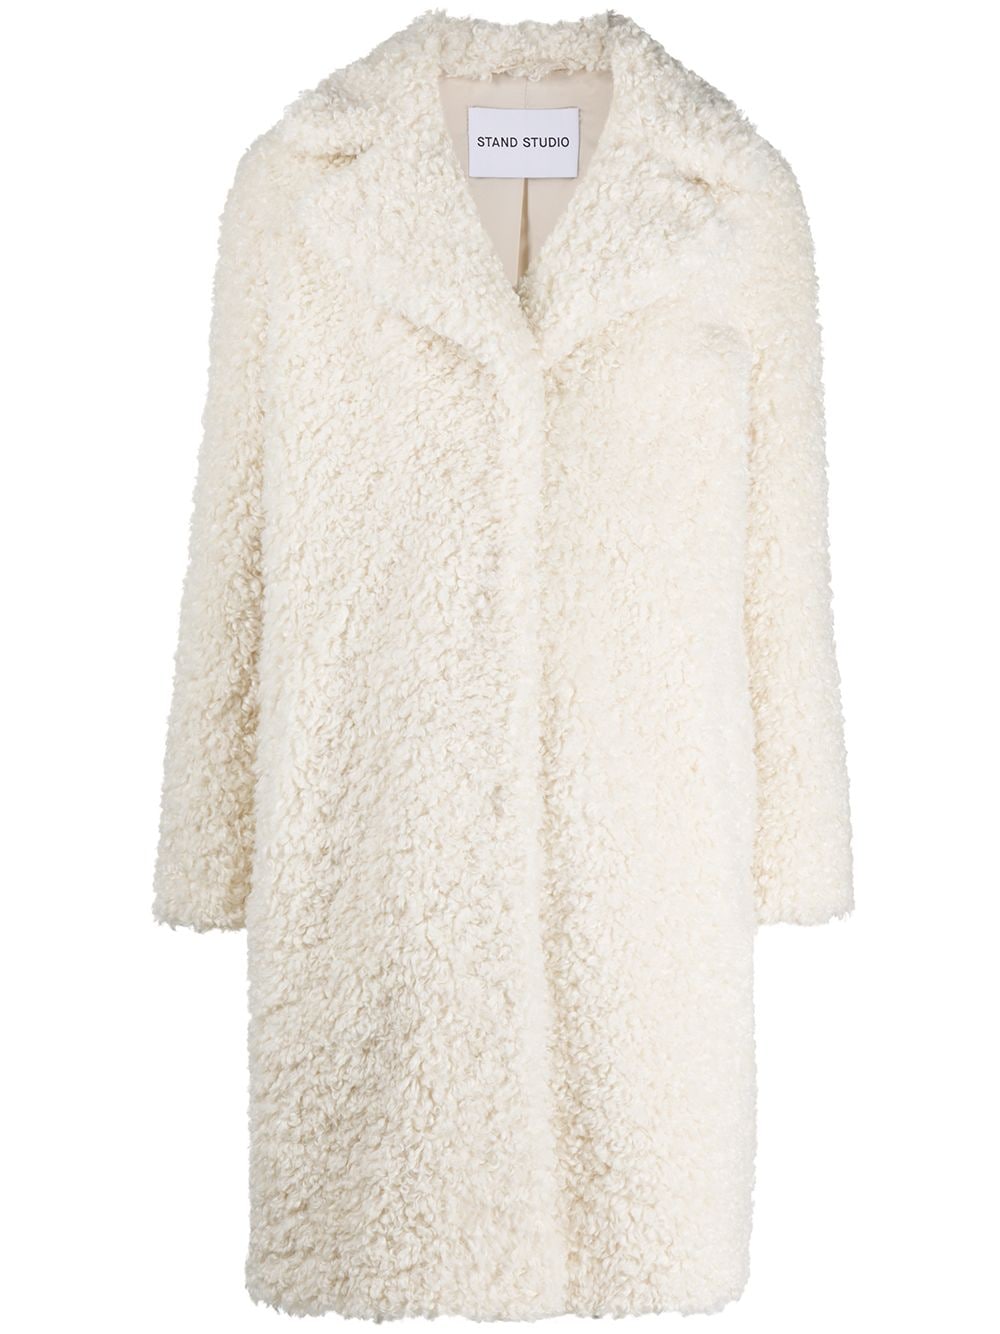 STAND STUDIO Single Breasted Faux Shearling Coat - Farfetch